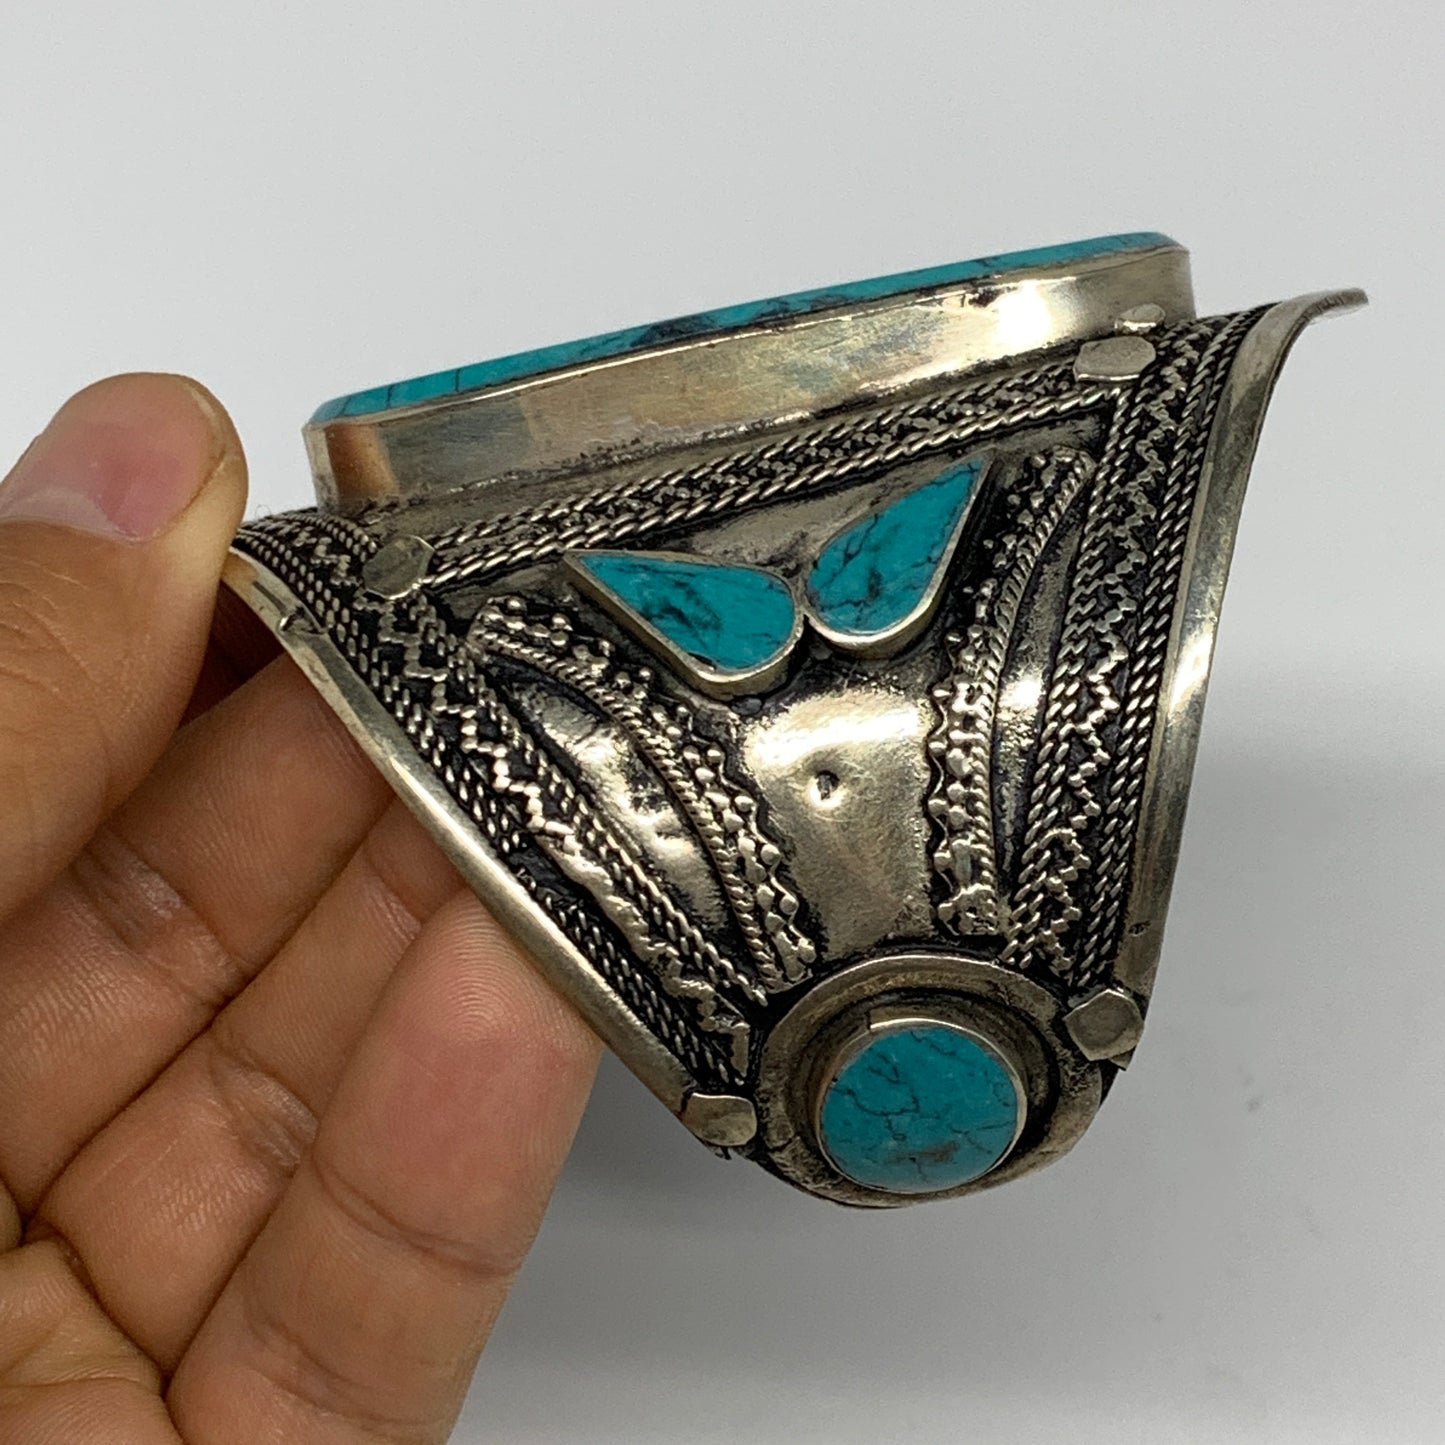 55.5g, Vintage Reproduced Afghan Turkmen Synthetic Turquoise Cuff Bracelet, B132